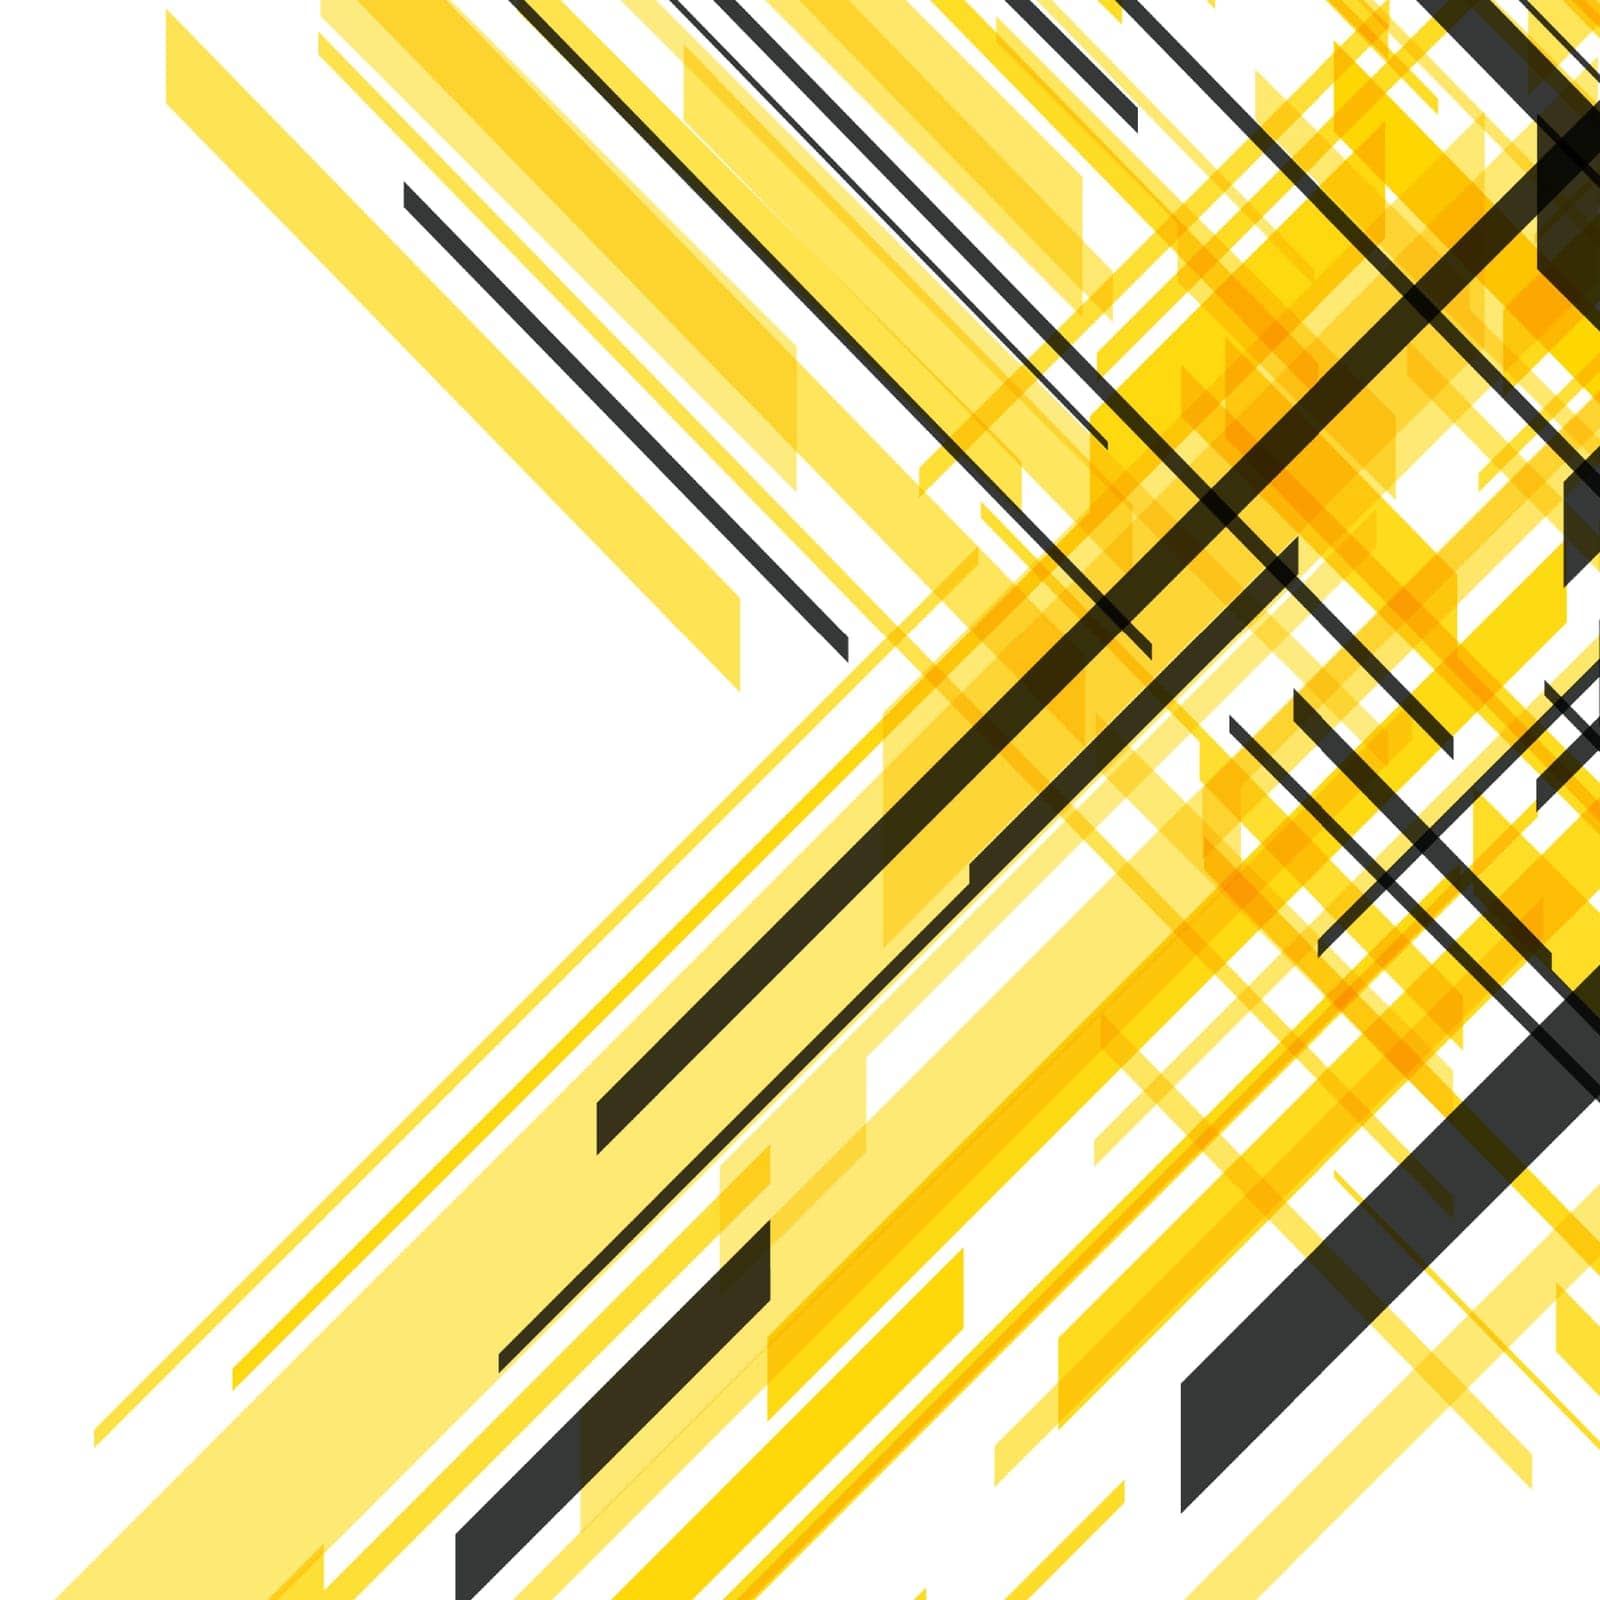 A dynamic display of yellow and black geometric lines intersecting at various angles, creating a vibrant and modern abstract pattern that conveys a sense of speed and technology.